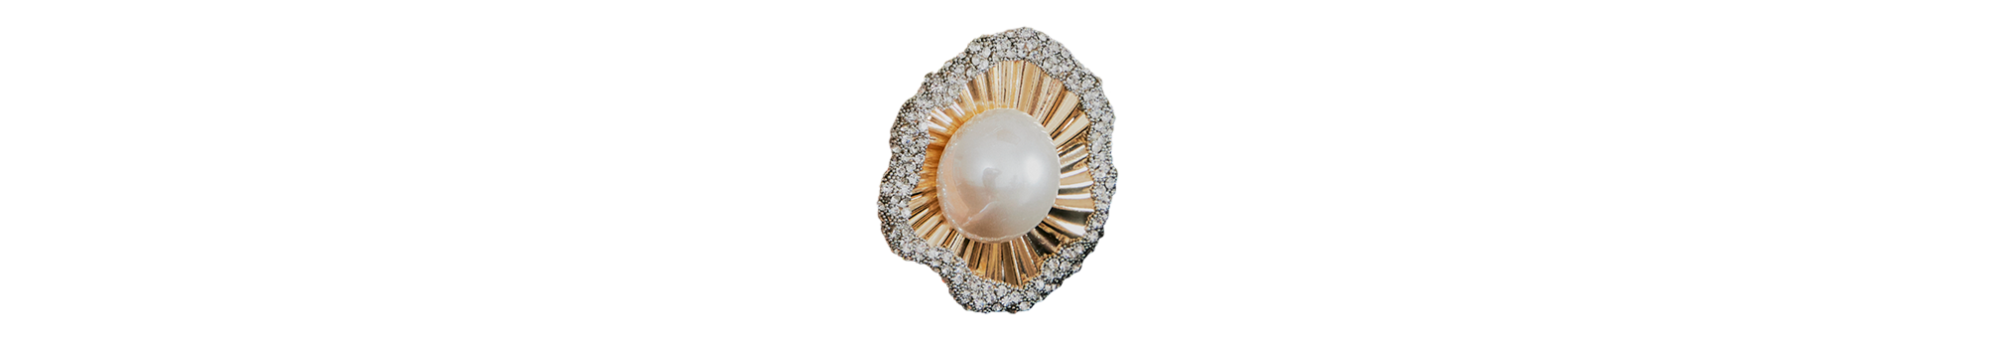 a pearl and diamond brooch